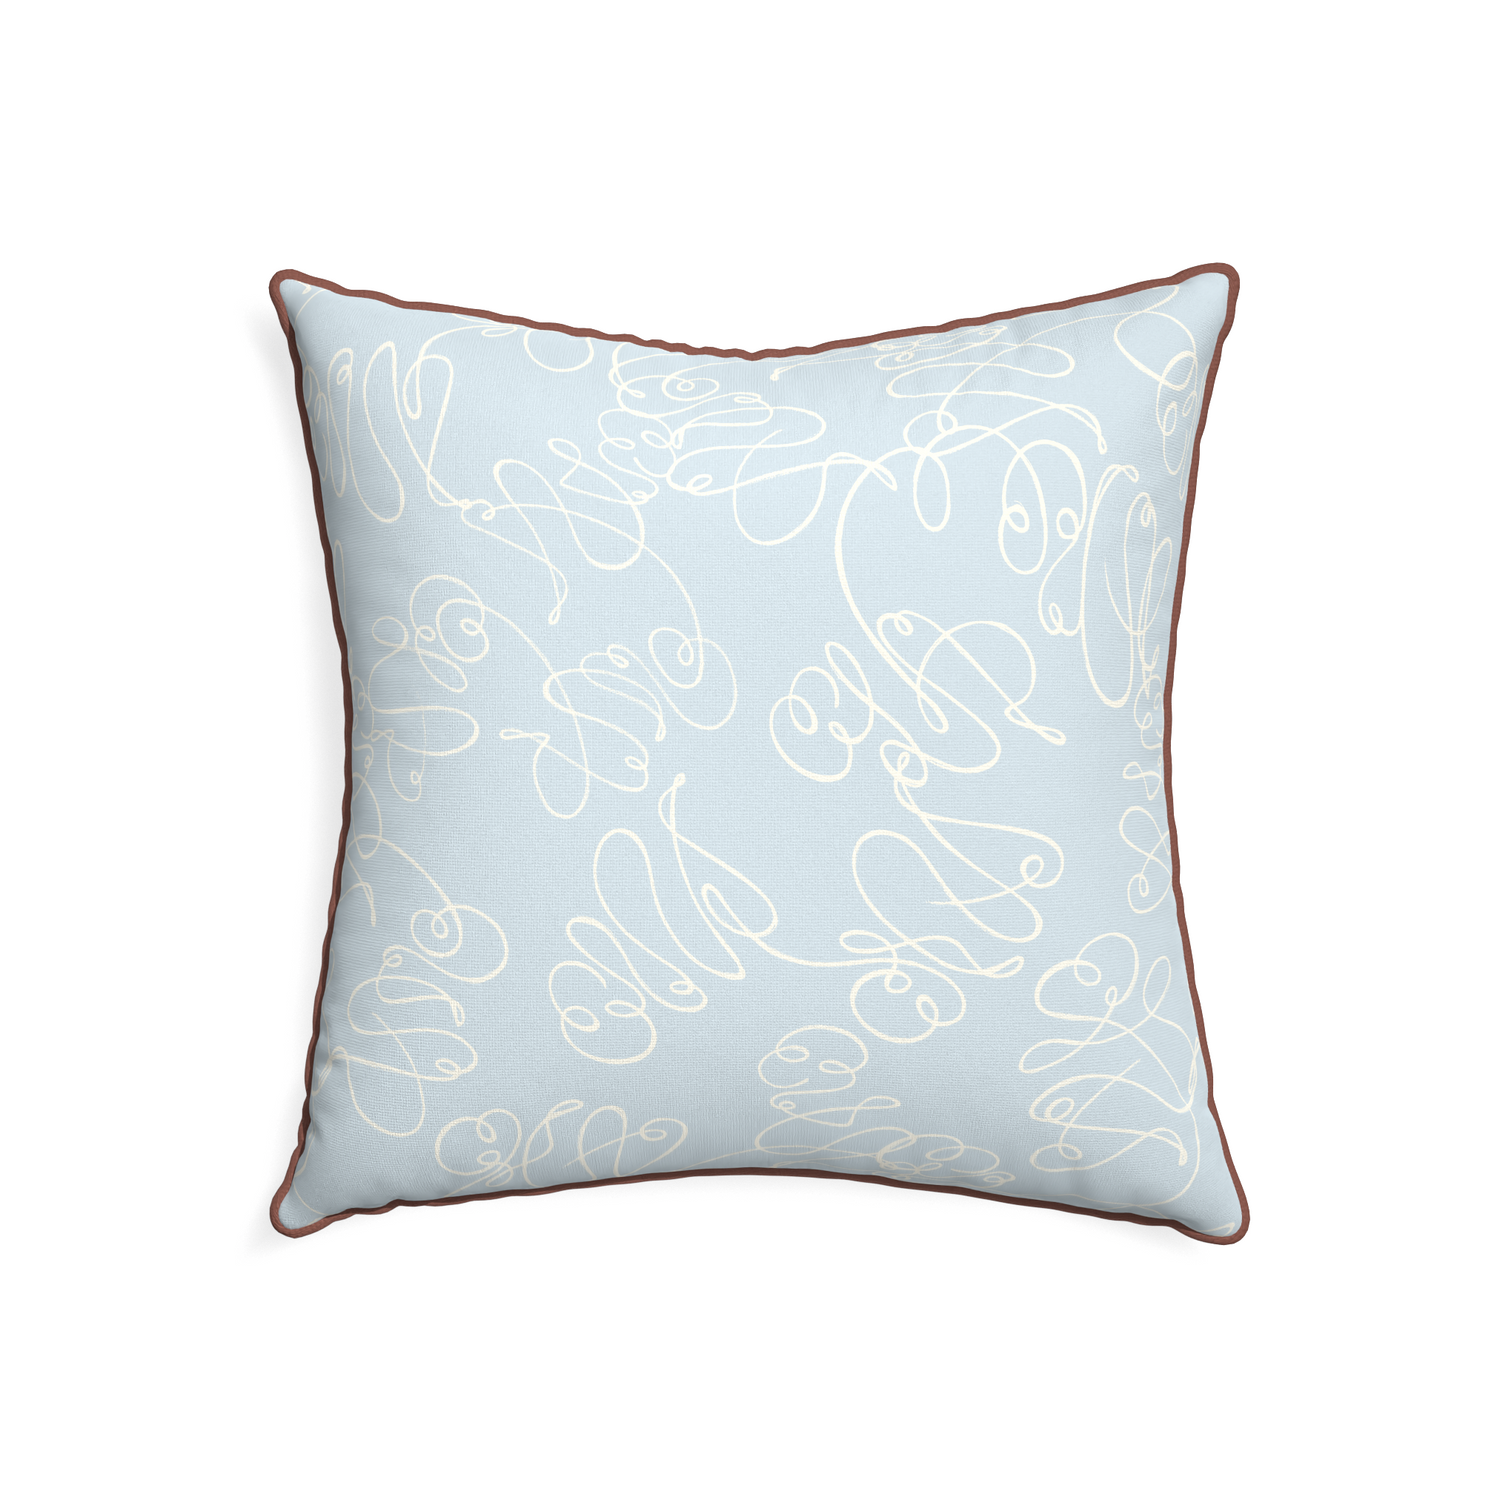 22-square mirabella custom pillow with w piping on white background